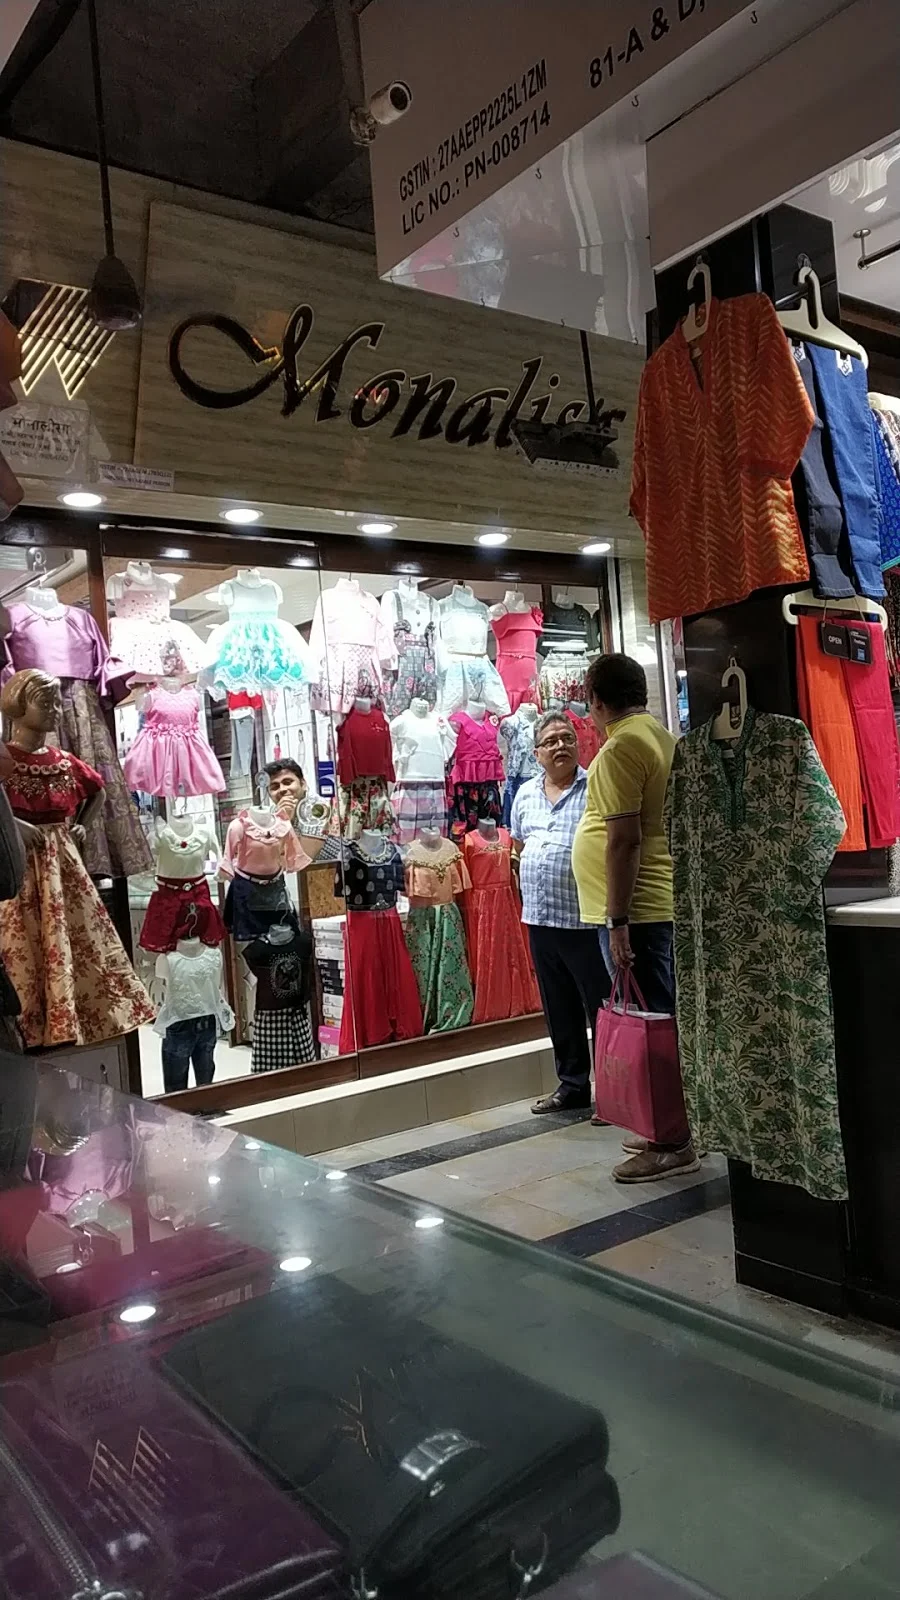 Monalisa Apparel and clothing retail chain